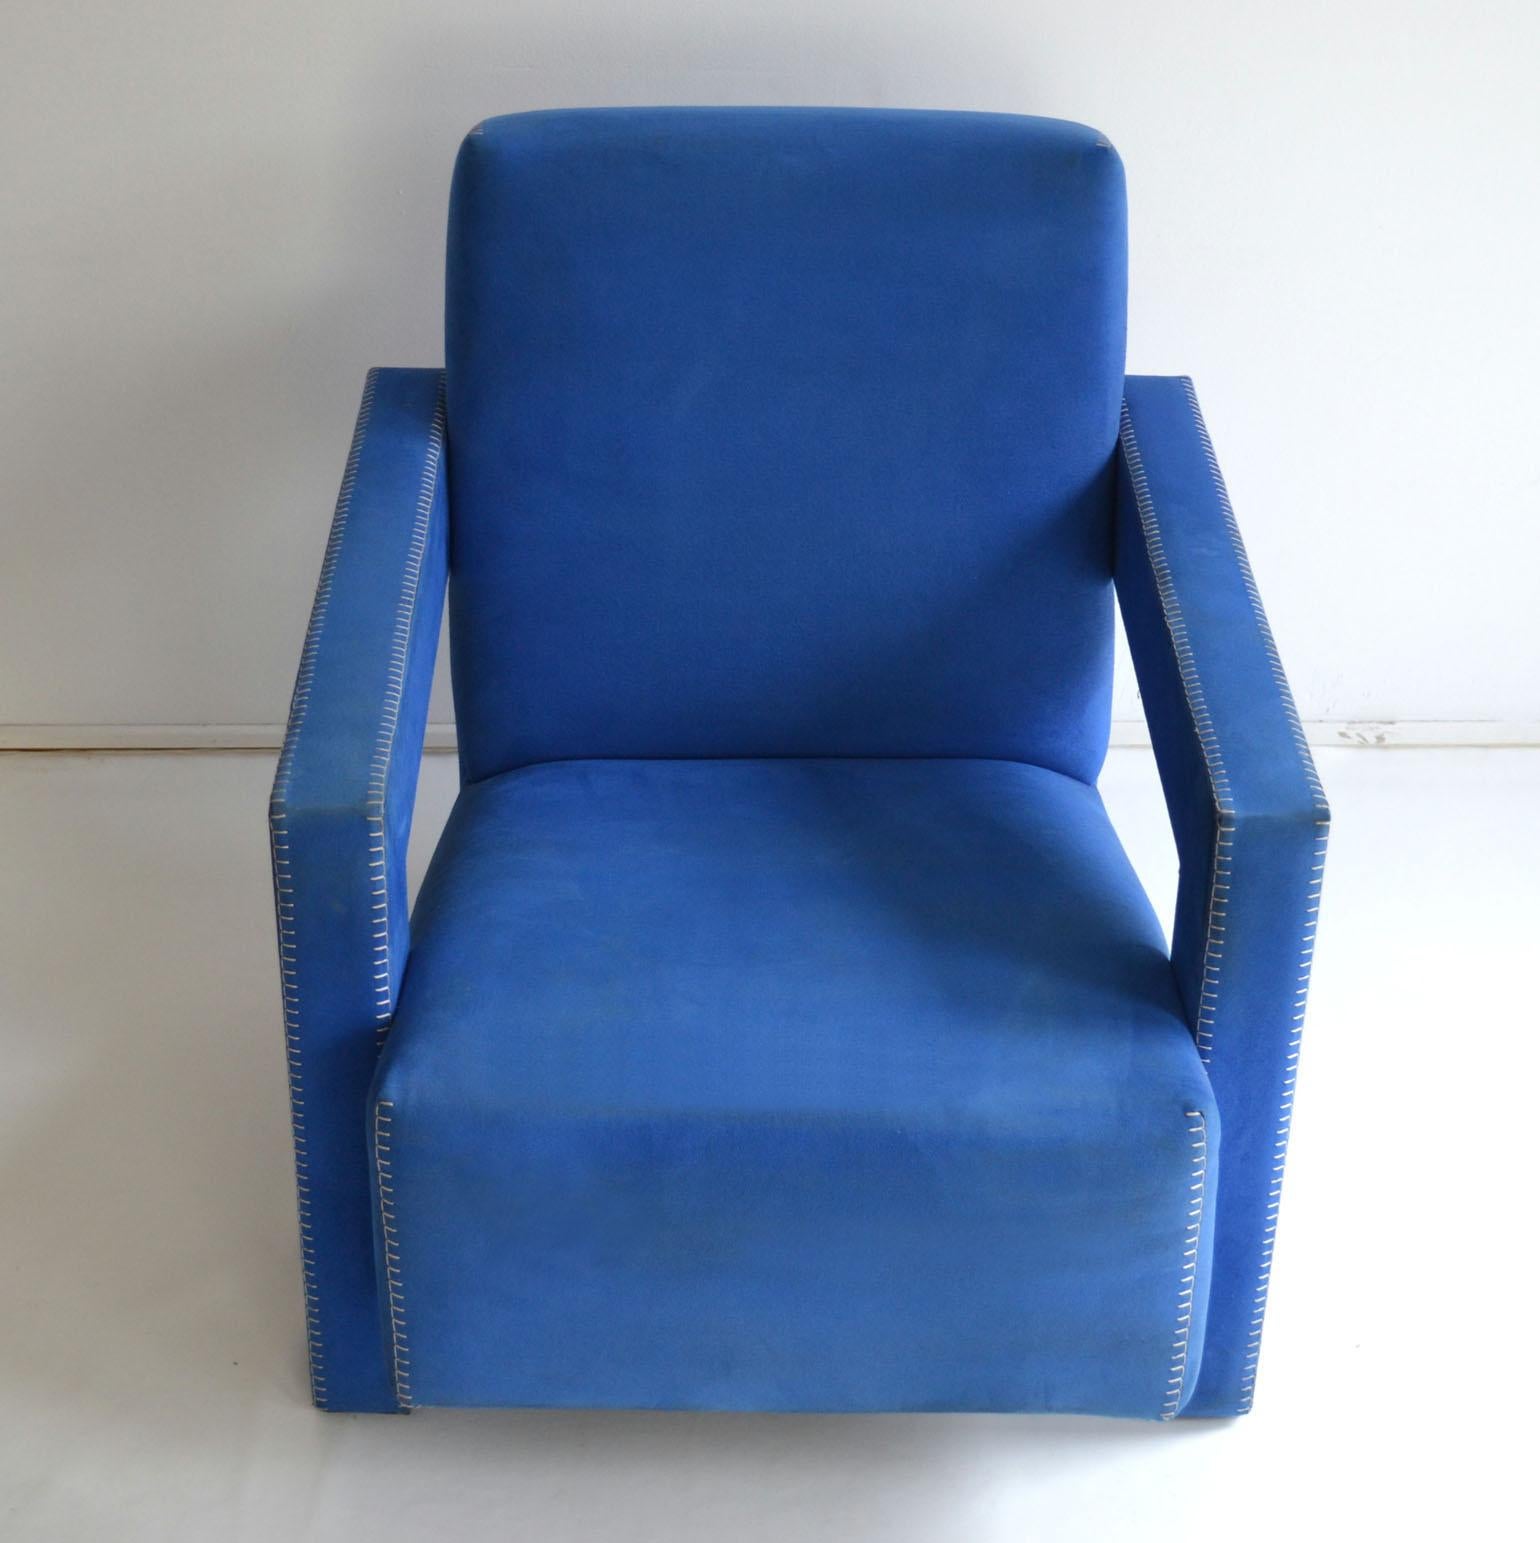 Textile Blue 'Utrecht' Chair by Dutch Gerrit Rietveld for Cassina 1980s Italy